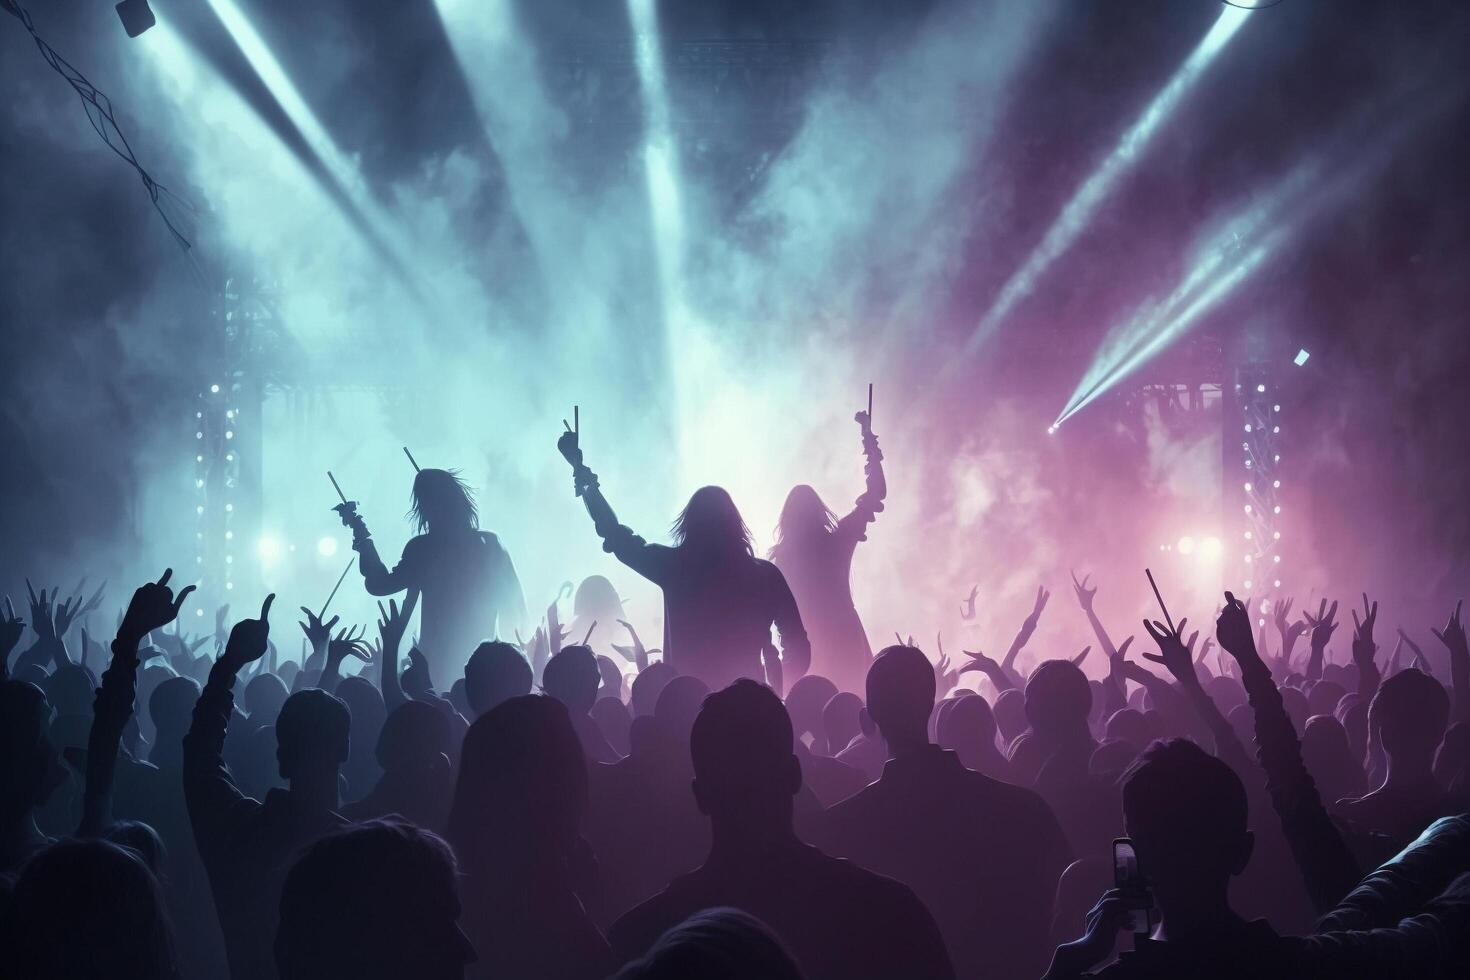 A crowd of people at a concert, crowd of people dancing on dancefloor, photo